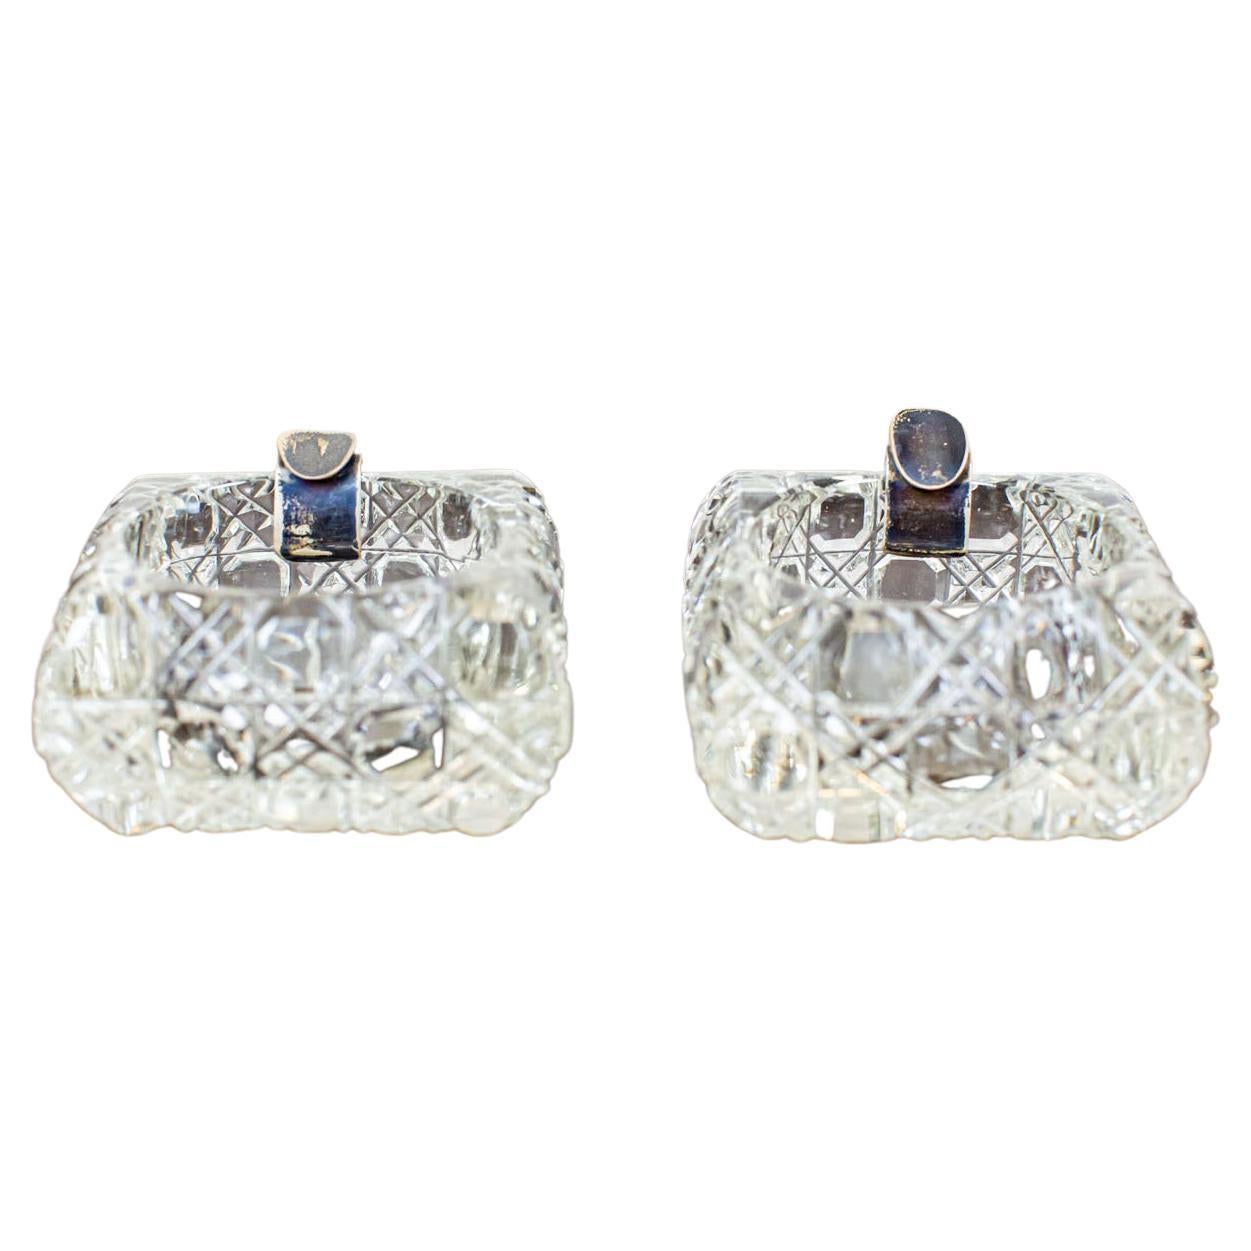 Two Crystal Ashtrays from the Early 20th Century For Sale